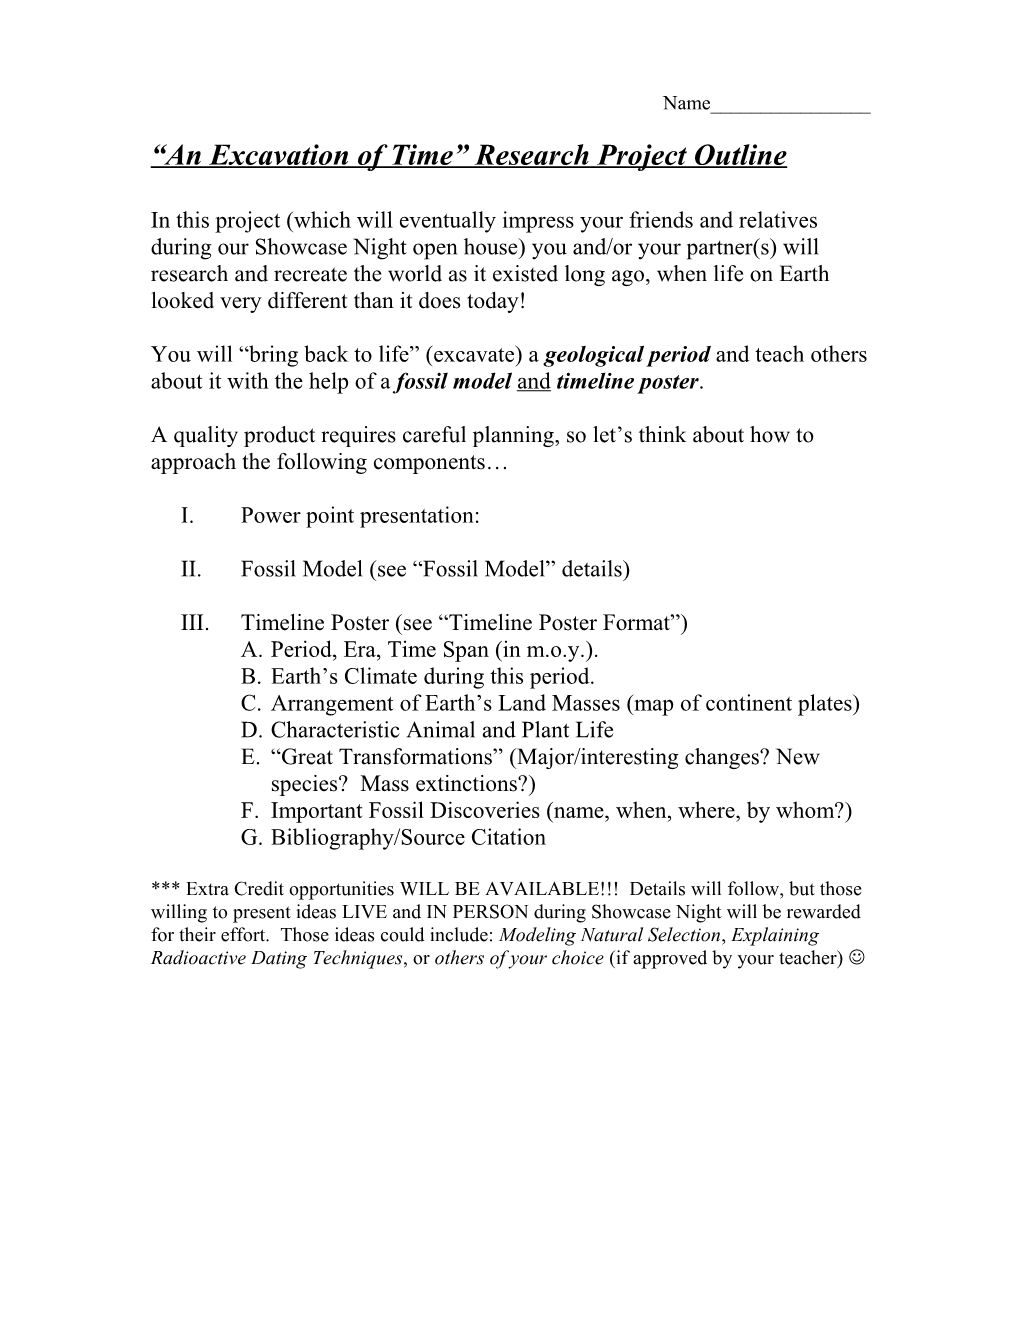 An Excavation of Time Research Project Outline